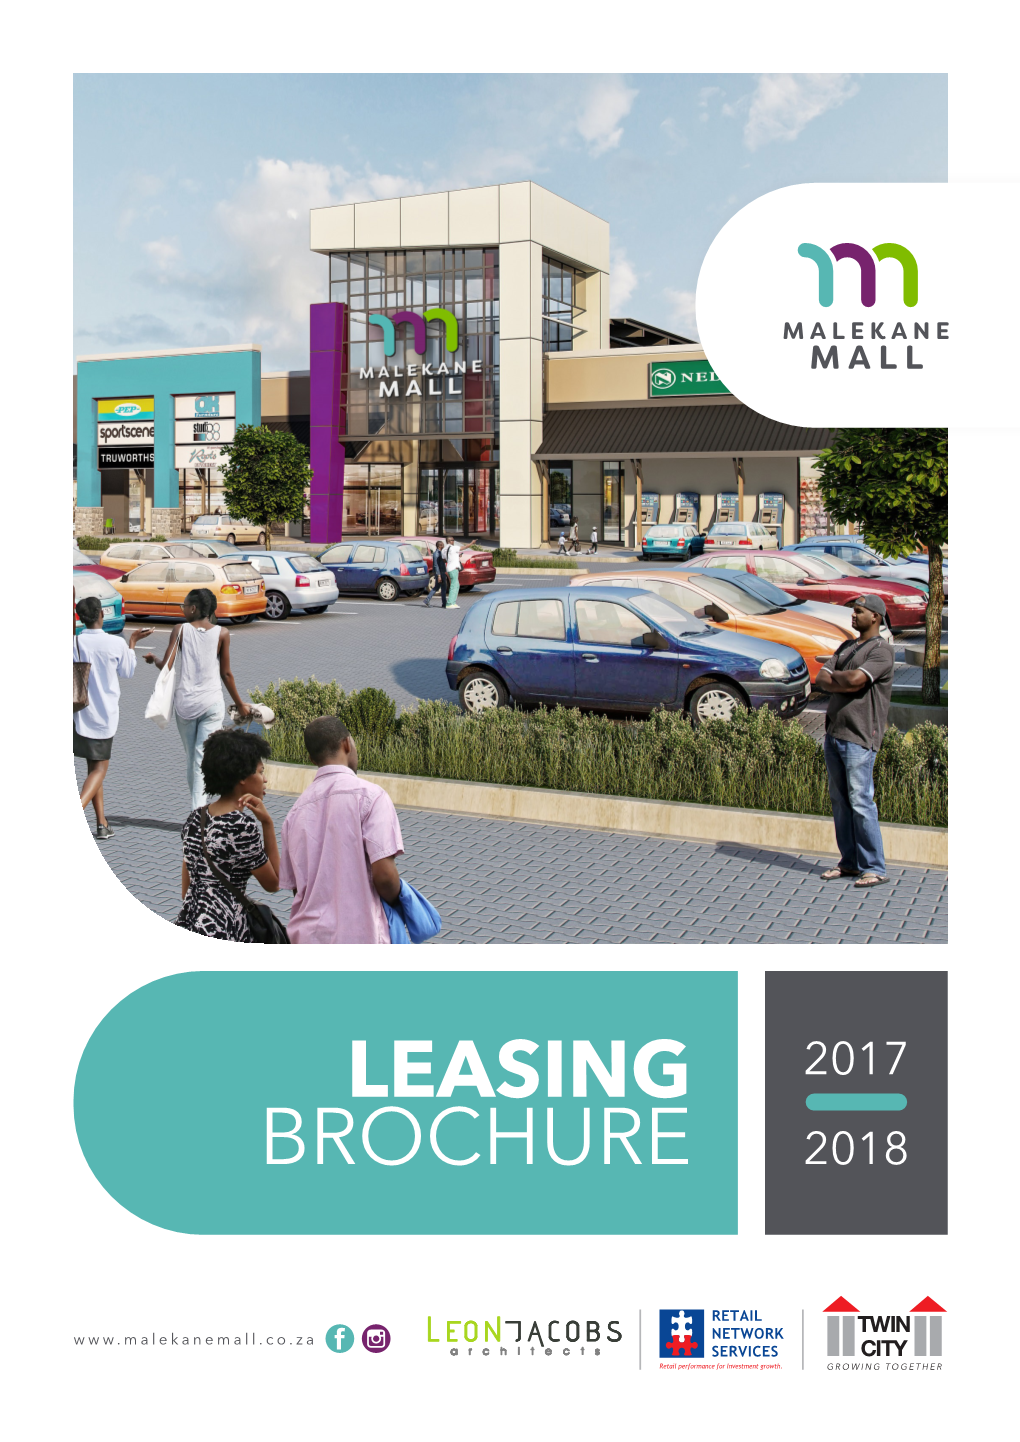 Leasing Brochure 2017/18 01 Demographic About the Profile Development